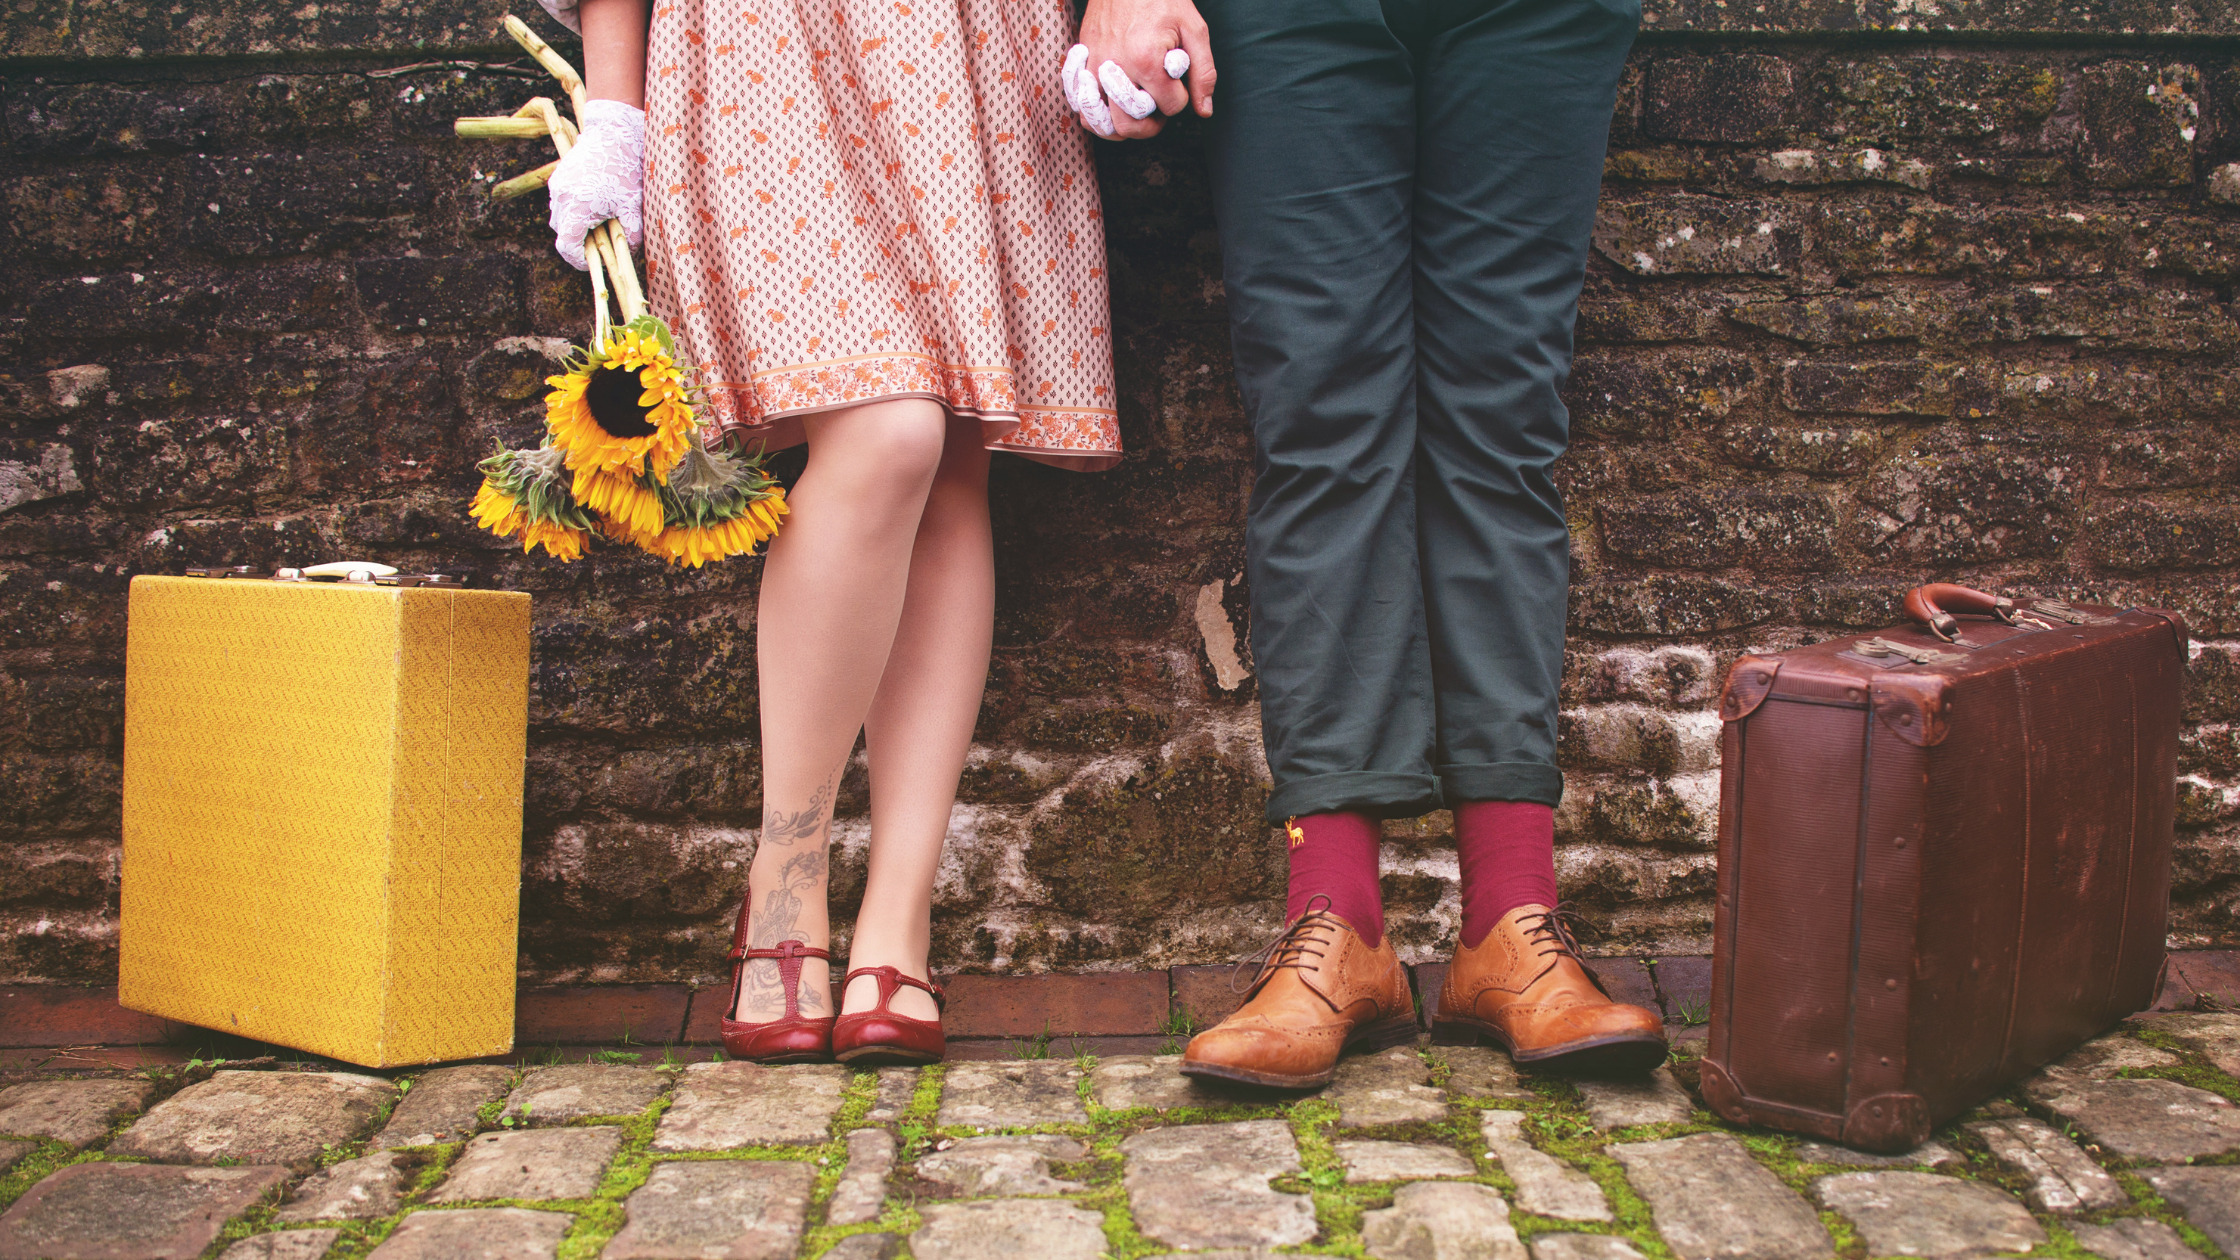 6 ways to grow with your partner and start building a healthy relationship